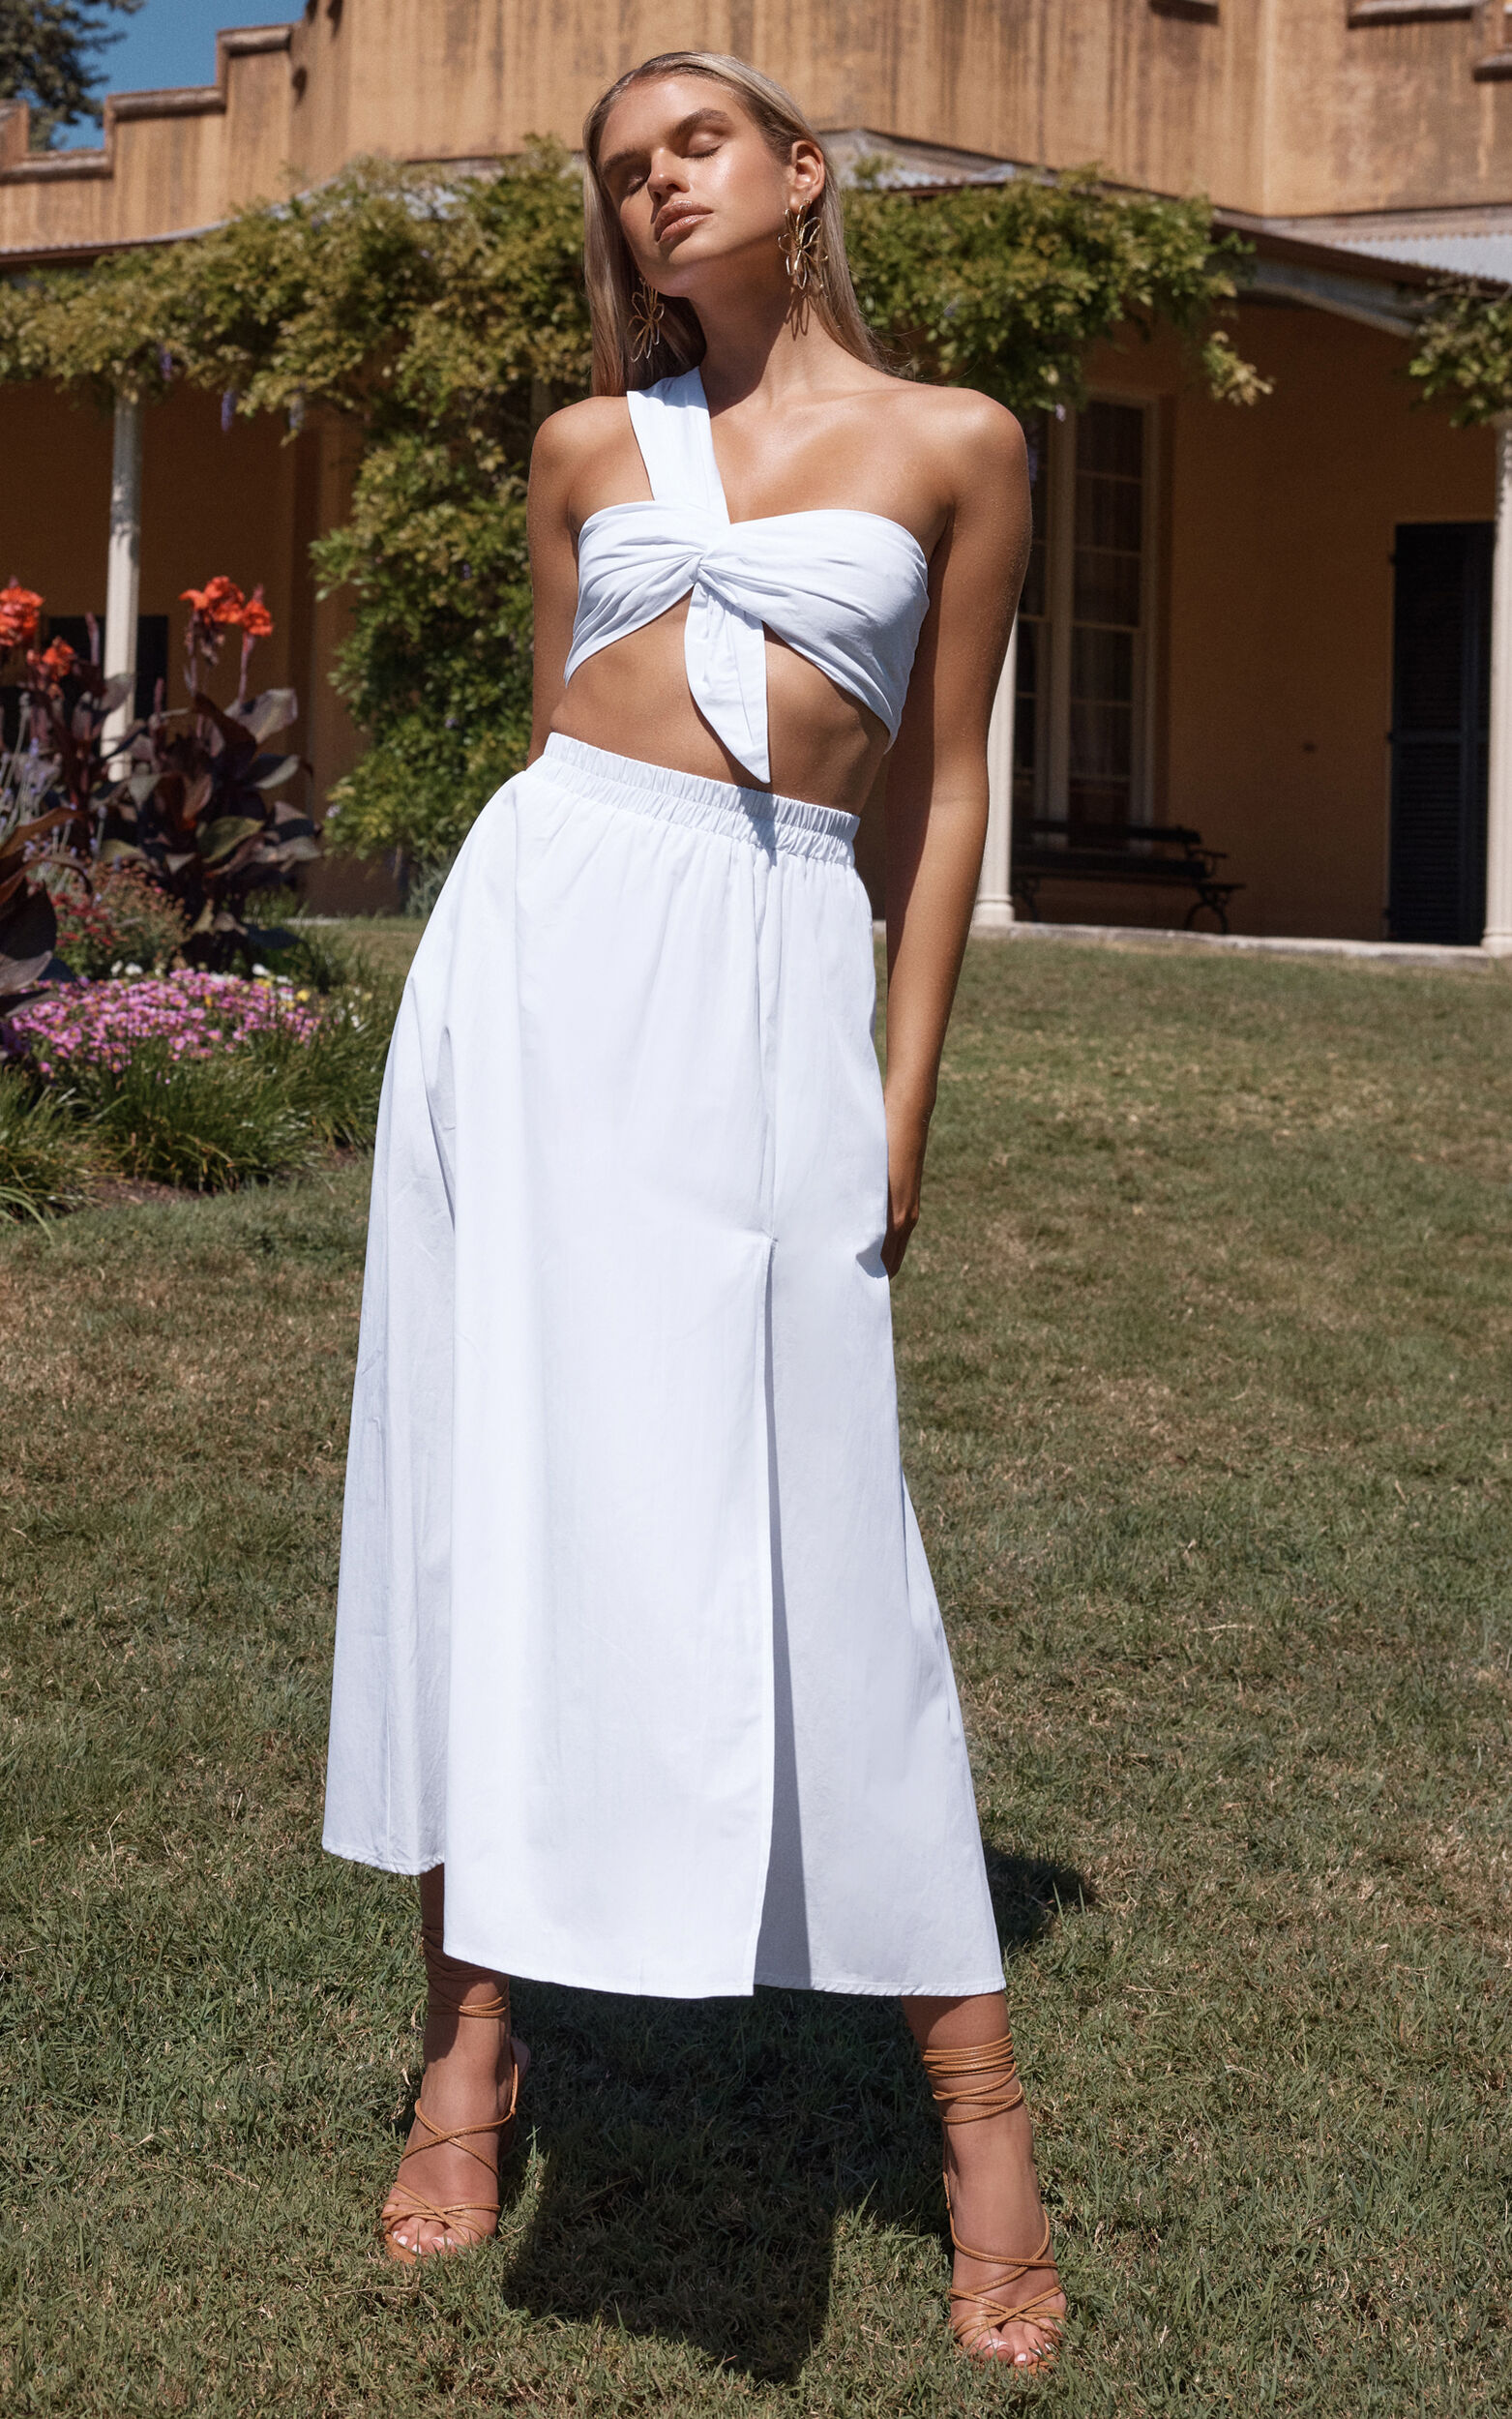 Sula Two Piece Set - One Shoulder Bralette Crop Top and Midi Skirt